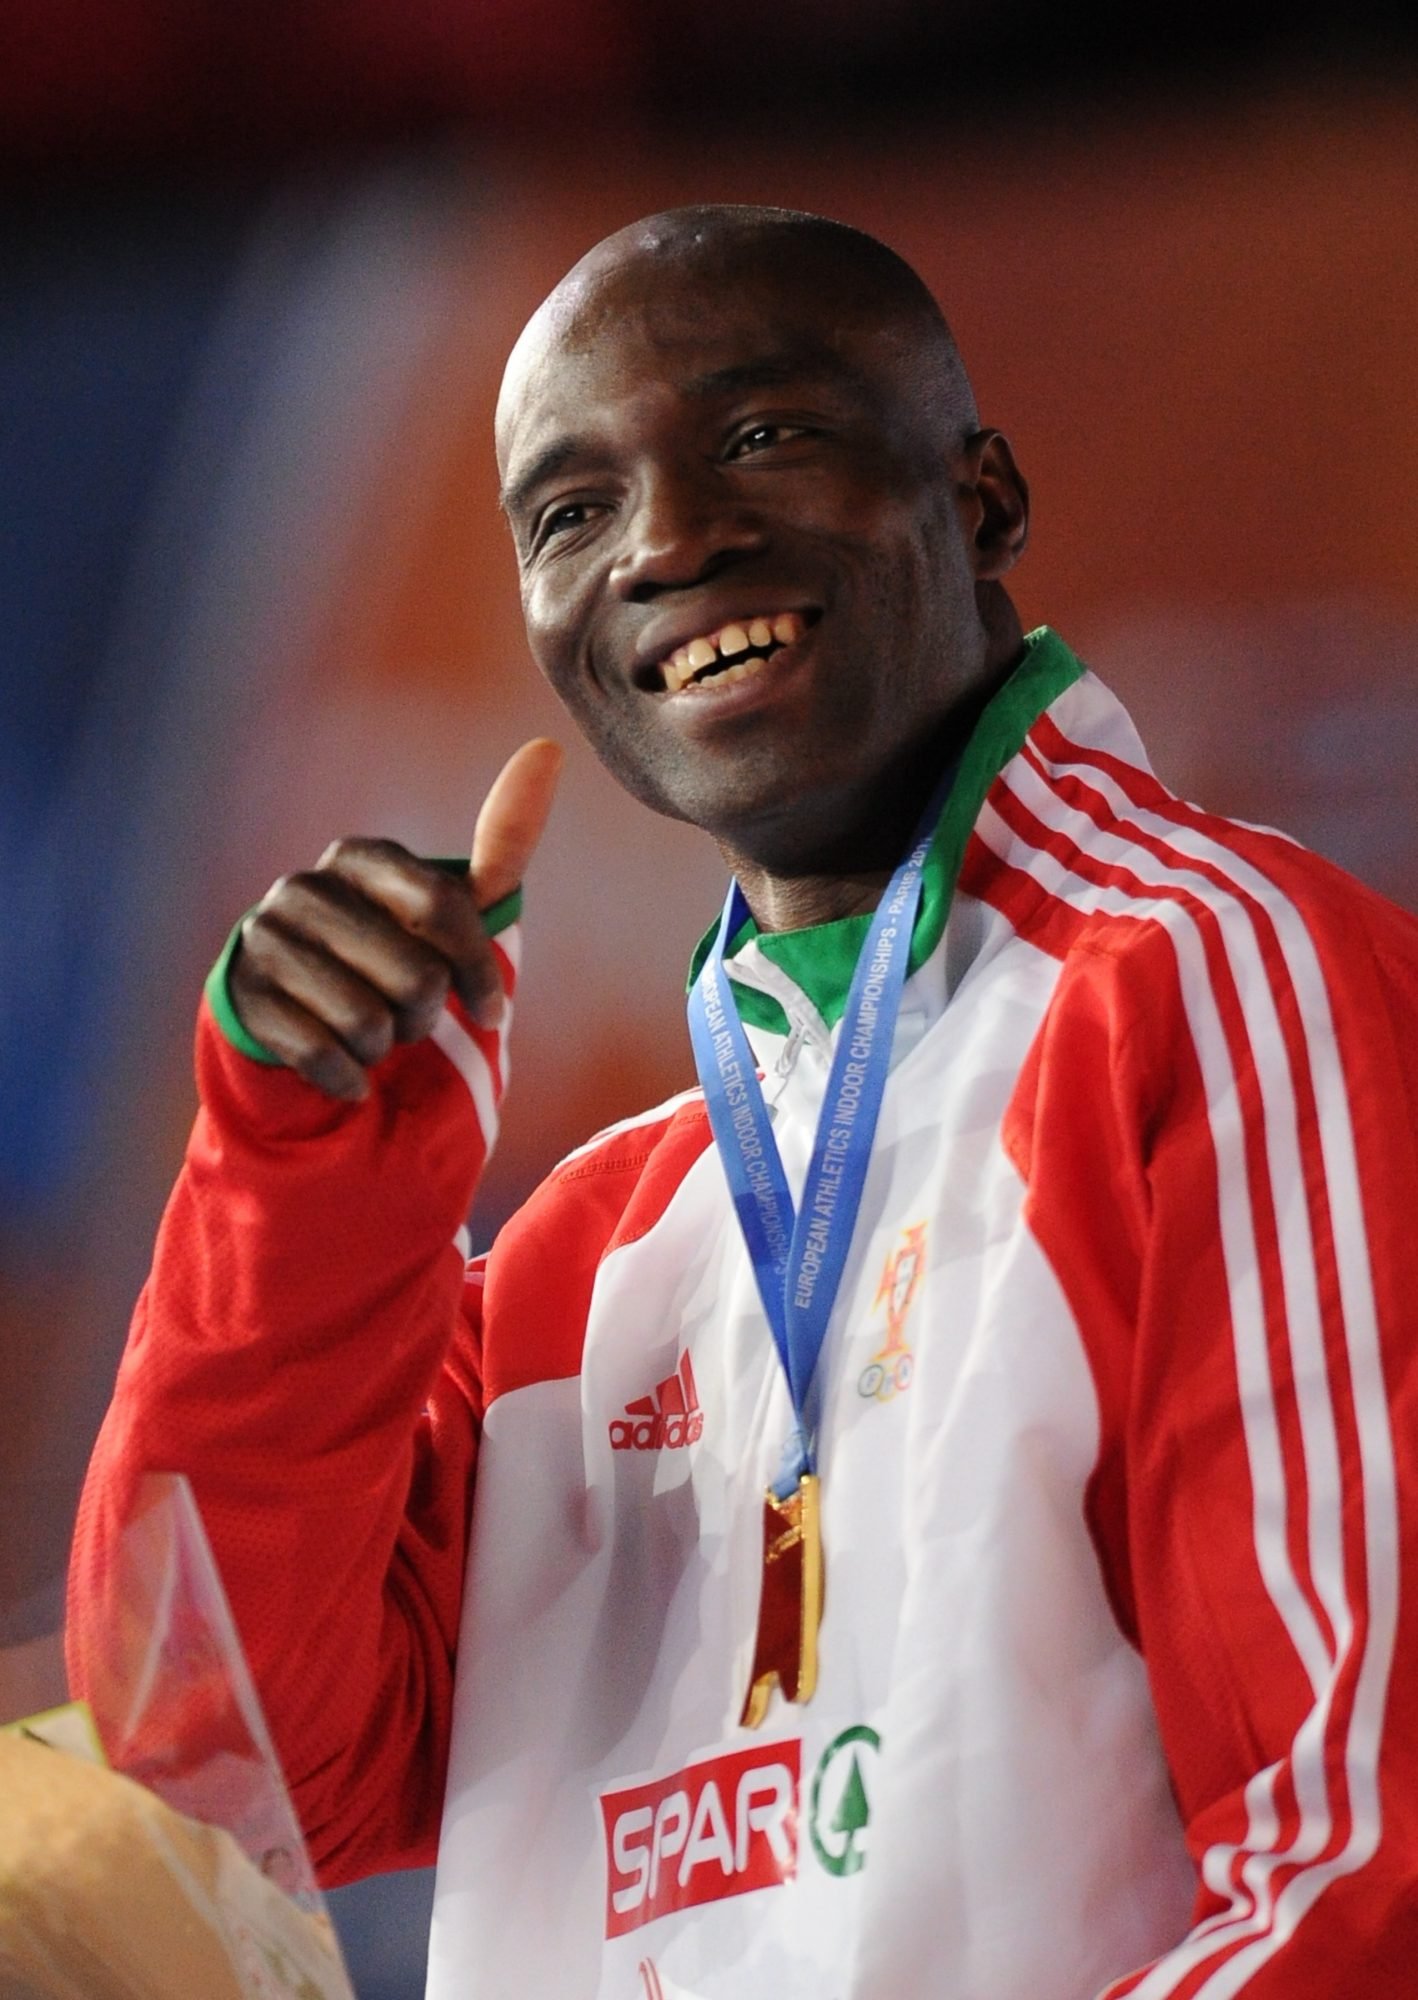 Portugal's Francis Obikwelu poses on the podium with his gold medal after the men's 60m final during the European athletics indoor championships on March 6, 2011 at the Bercy Palais-Omnisport (POPB) in Paris. Obikwelu arrived first ahead of Chambers and Lemaitre. AFP PHOTO / FRANCK FIFE (Photo credit should read FRANCK FIFE/AFP/Getty Images)